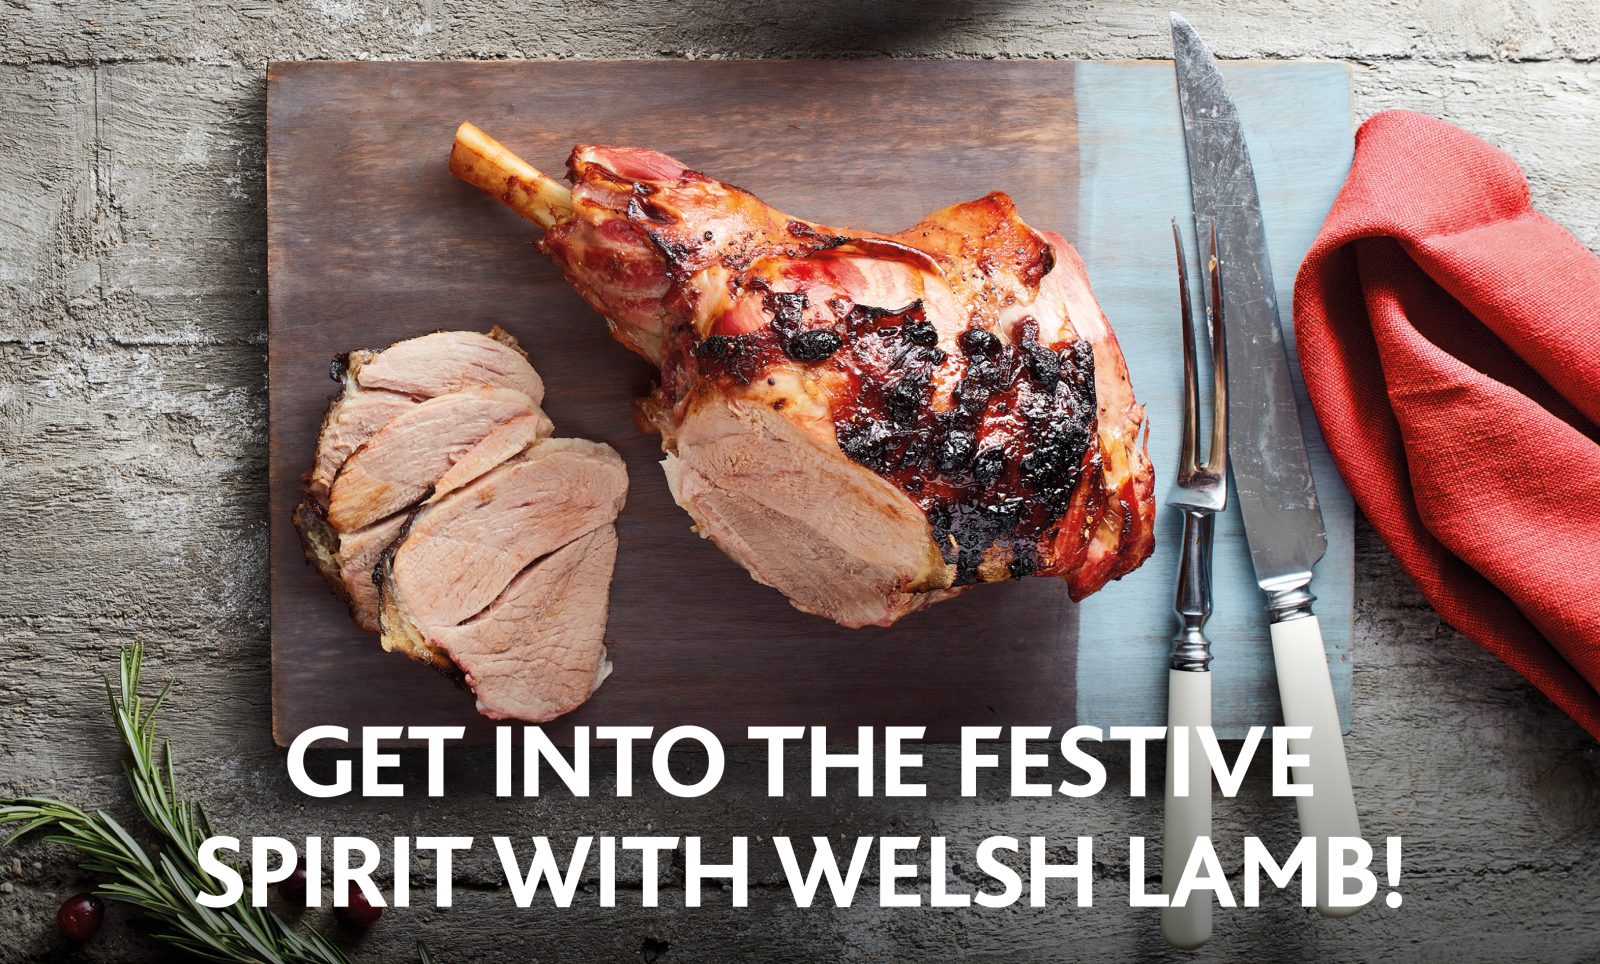 Get into the festive spirit with Welsh Lamb!